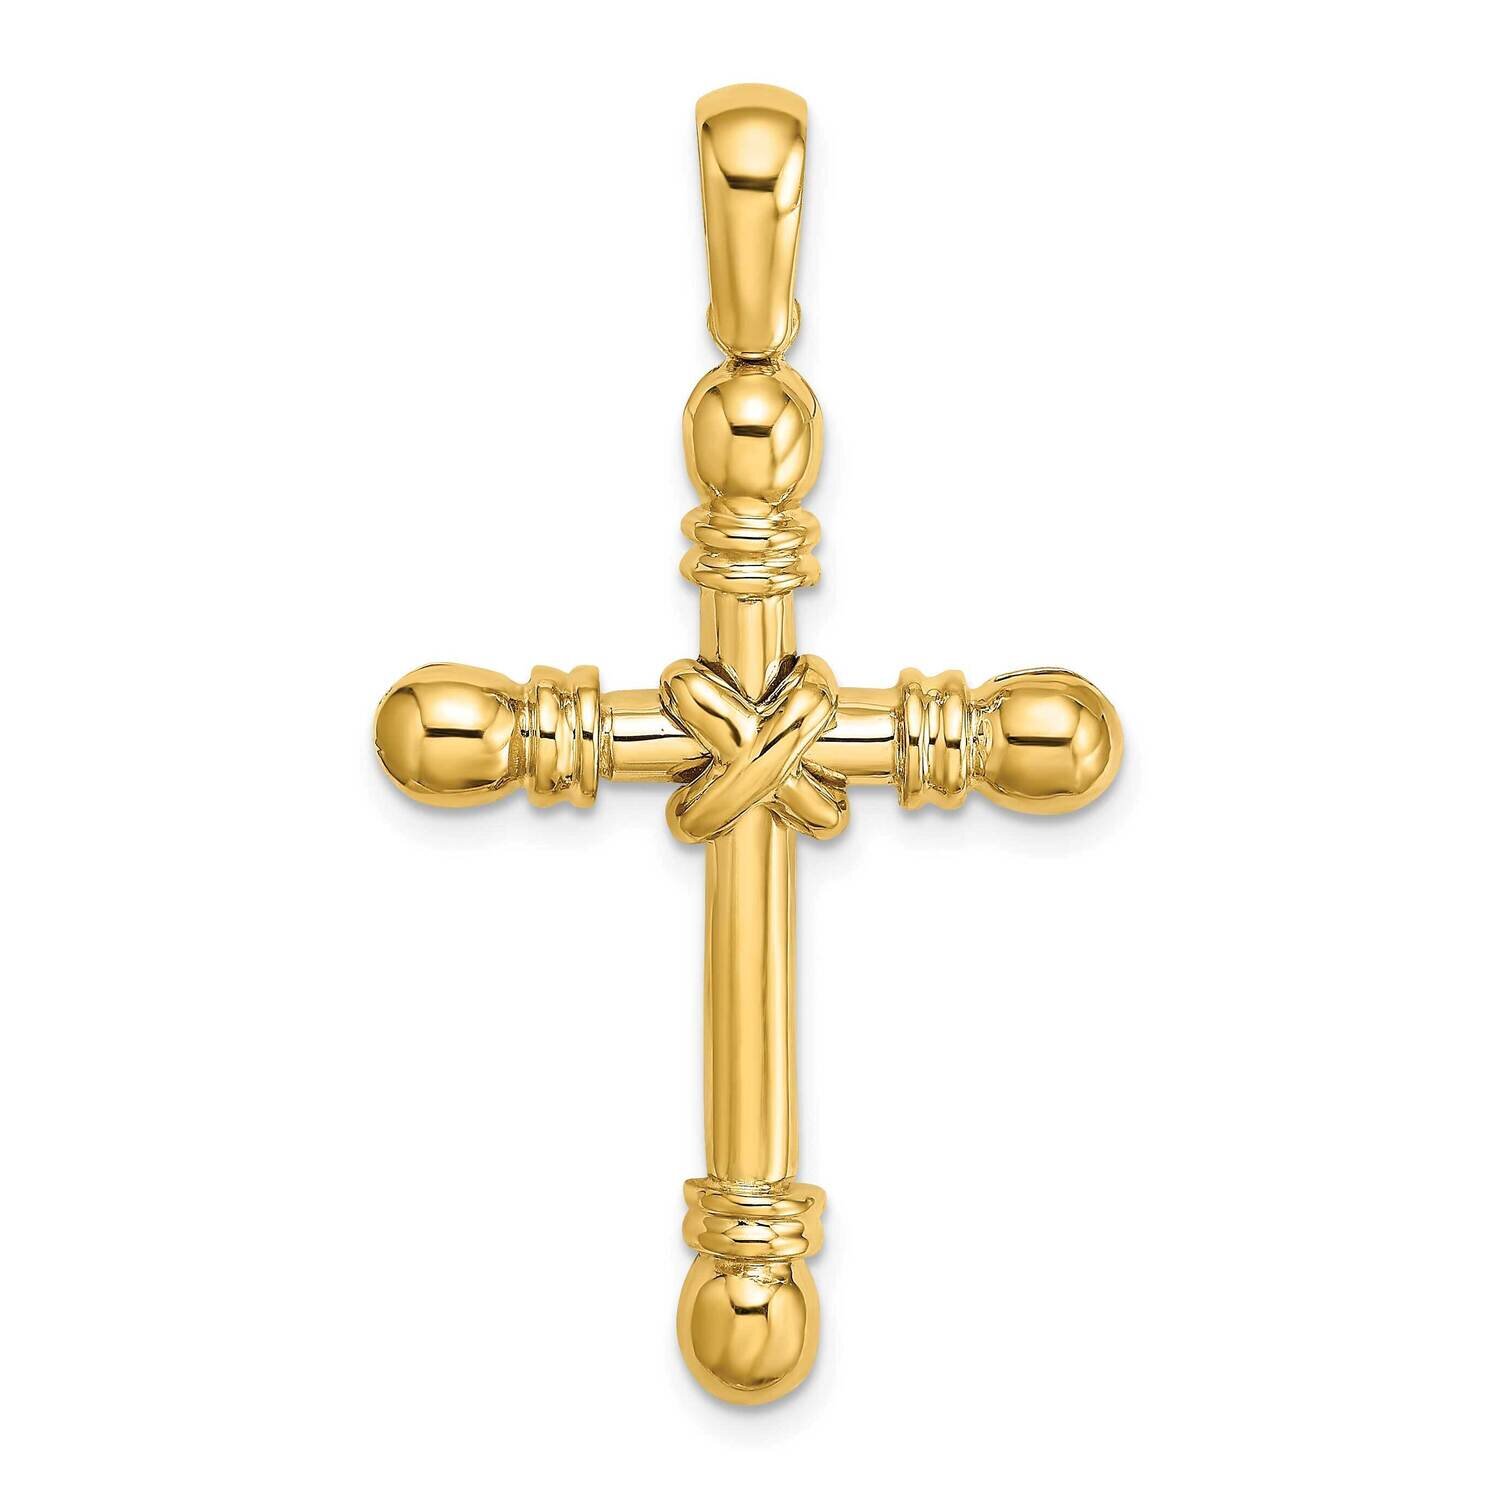 X In Center of Cross Charm 14k Gold Polished K9712